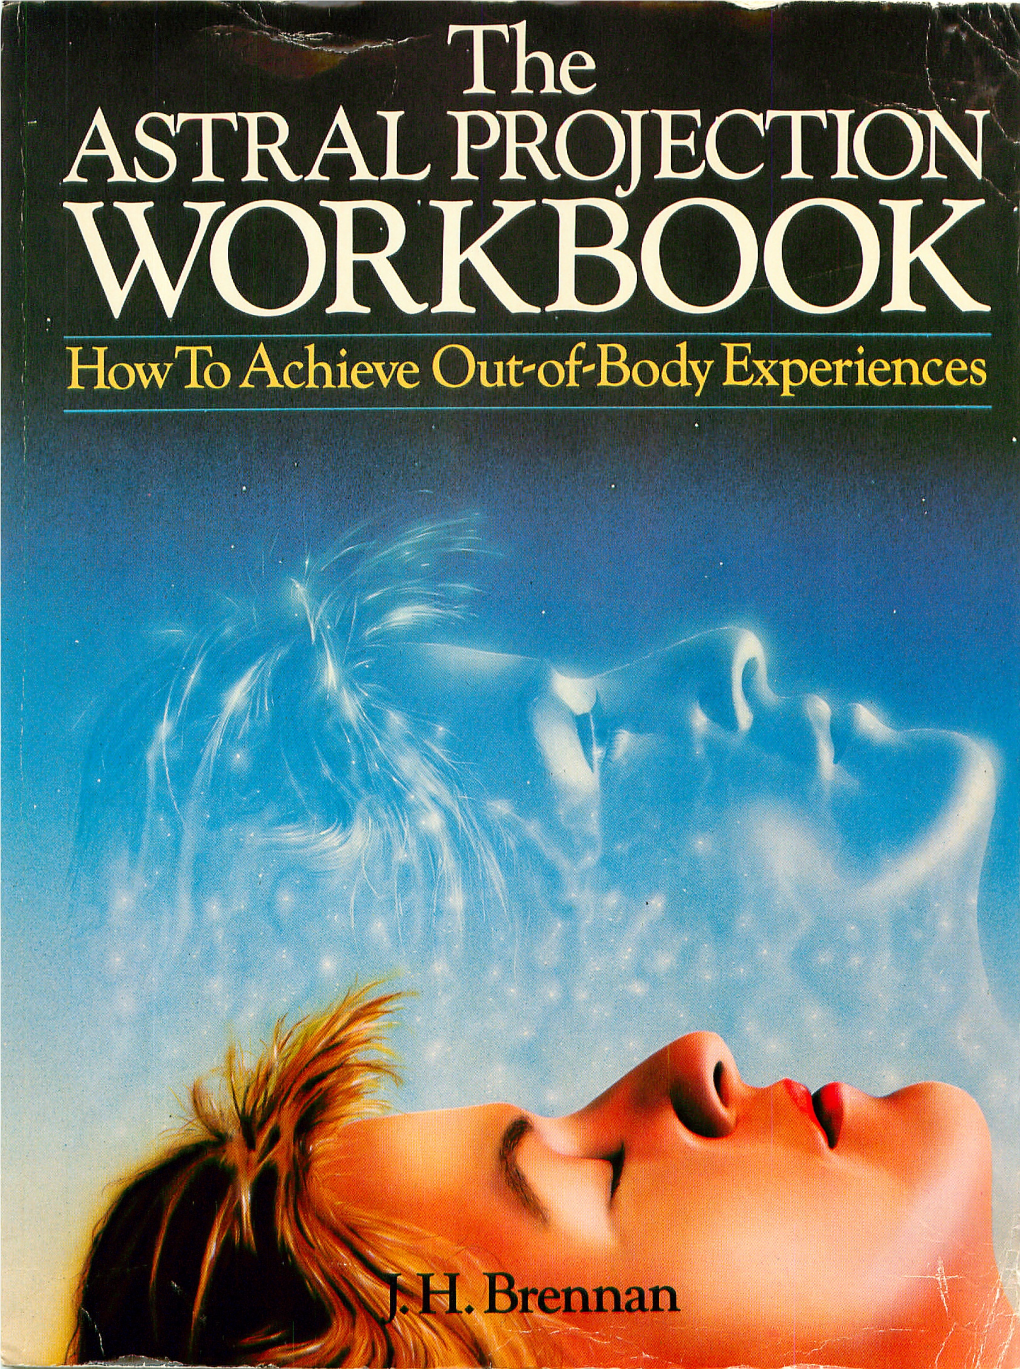 ASTRAL PROJECTION WORKBOOK Published in 1990 by Sterlingpublishingco., Inc